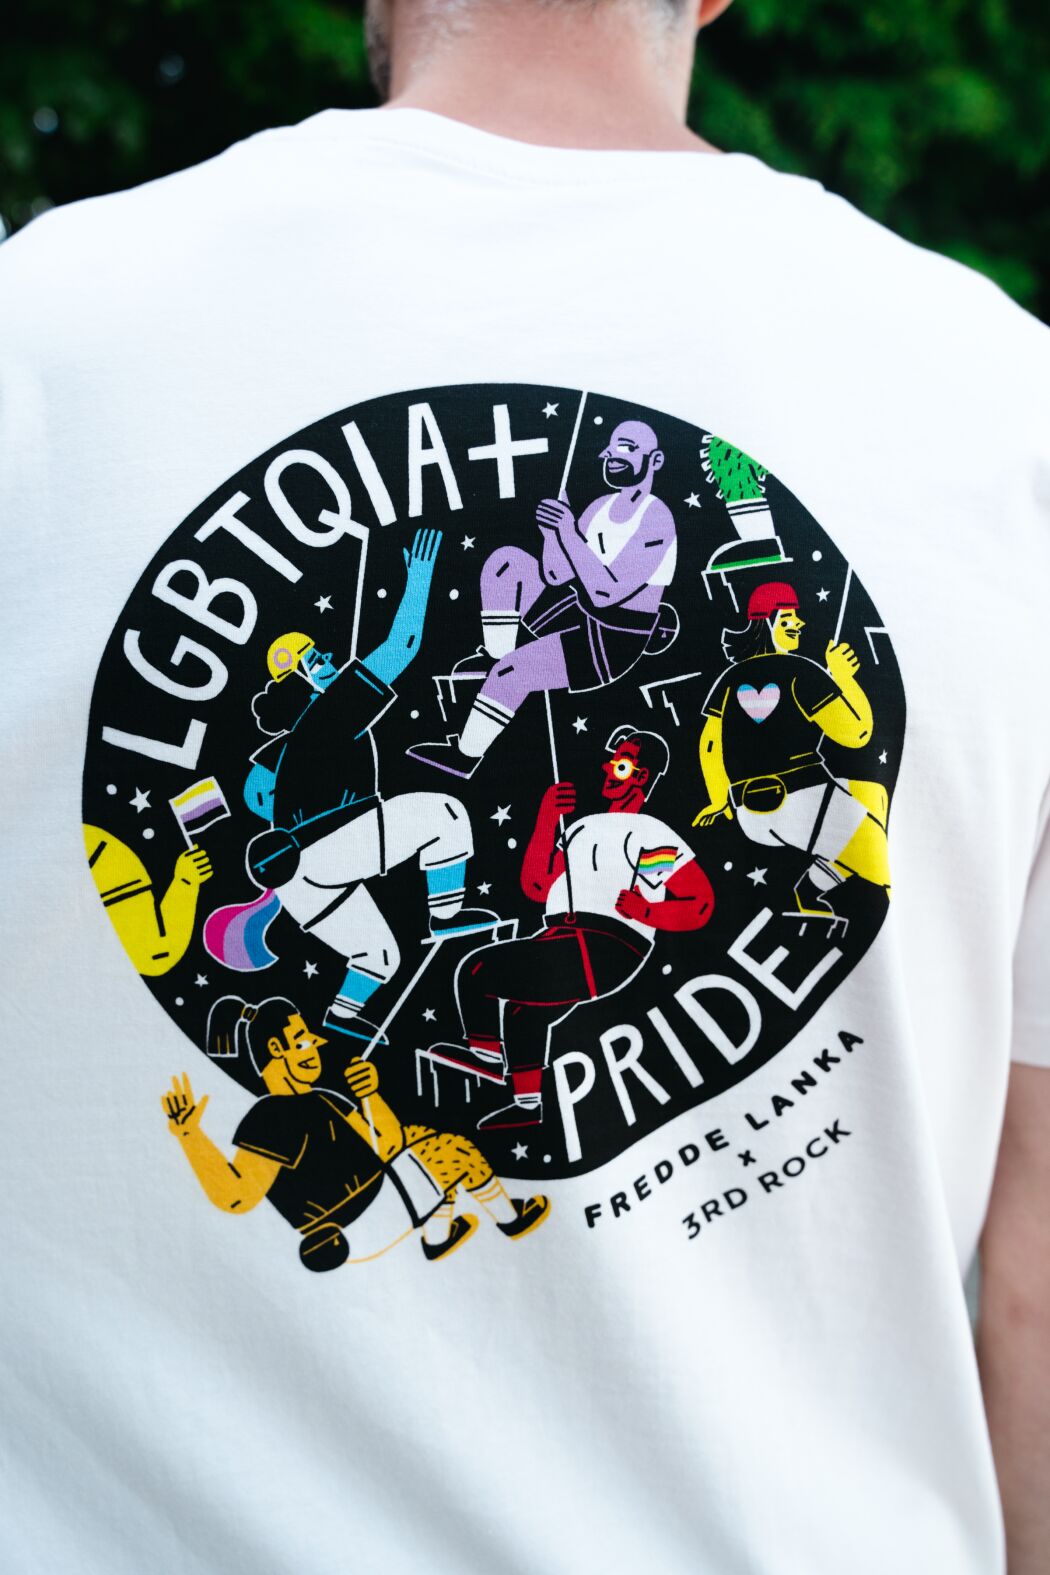 Illustrated logo and Pride campaign by Fredde Lanka 